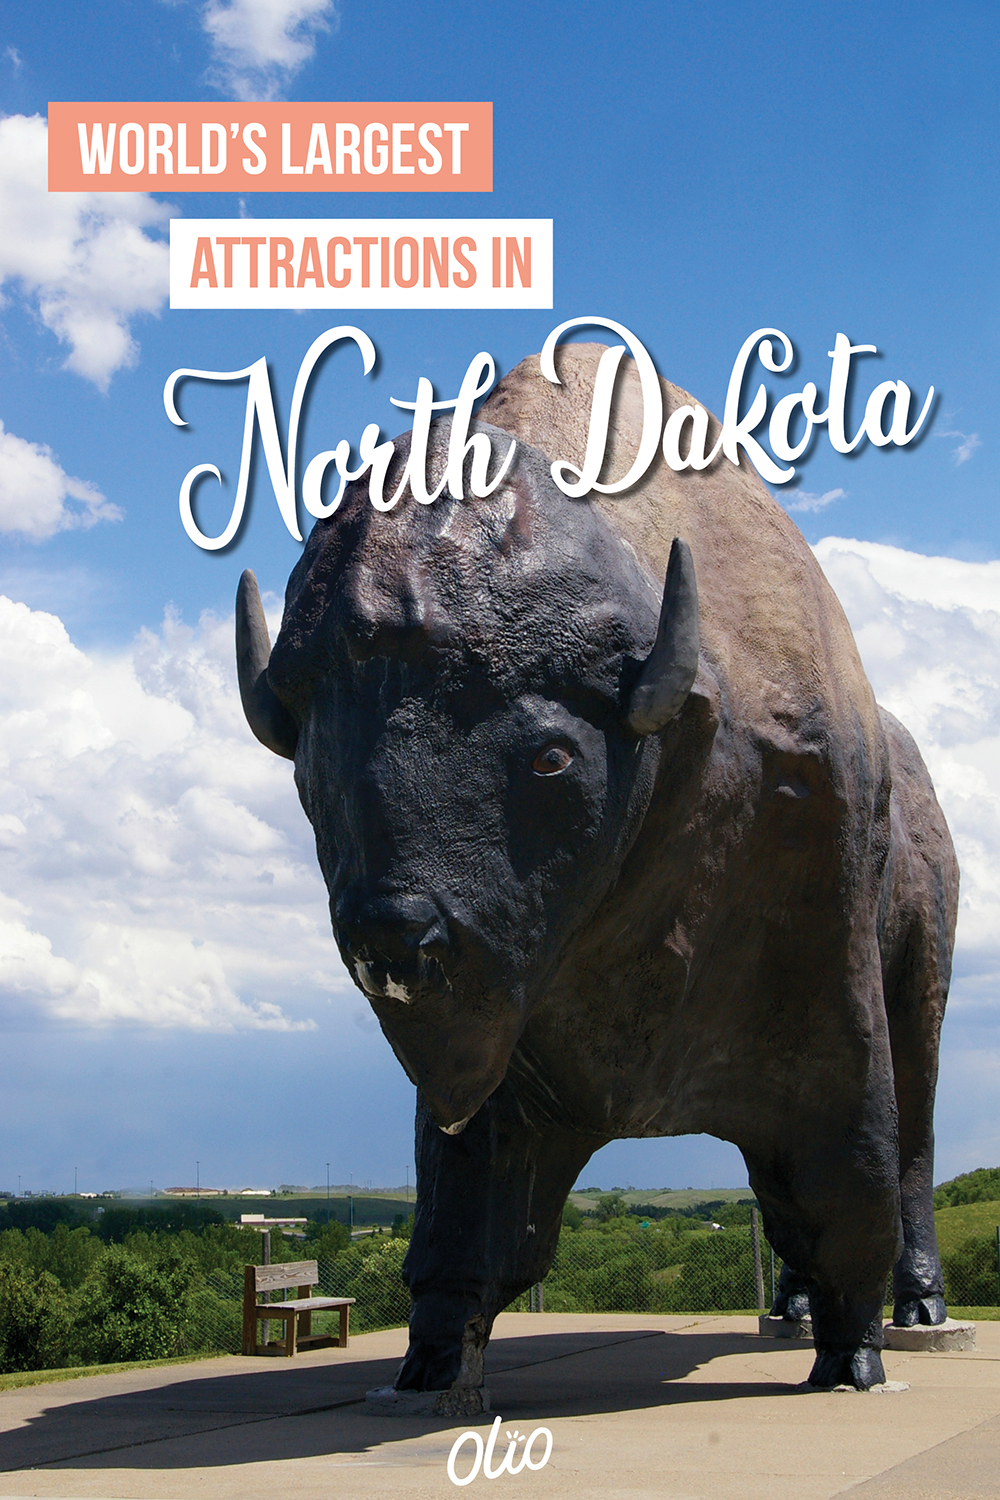 Plan a North Dakota road trip that's larger than life! There's tons of things to do in North Dakota, including stops at many of these large roadside attractions. Pose for funny photos at these "world's largest" things and cross these towering statues off your bucket list! #NorthDakota #WorldsLargest